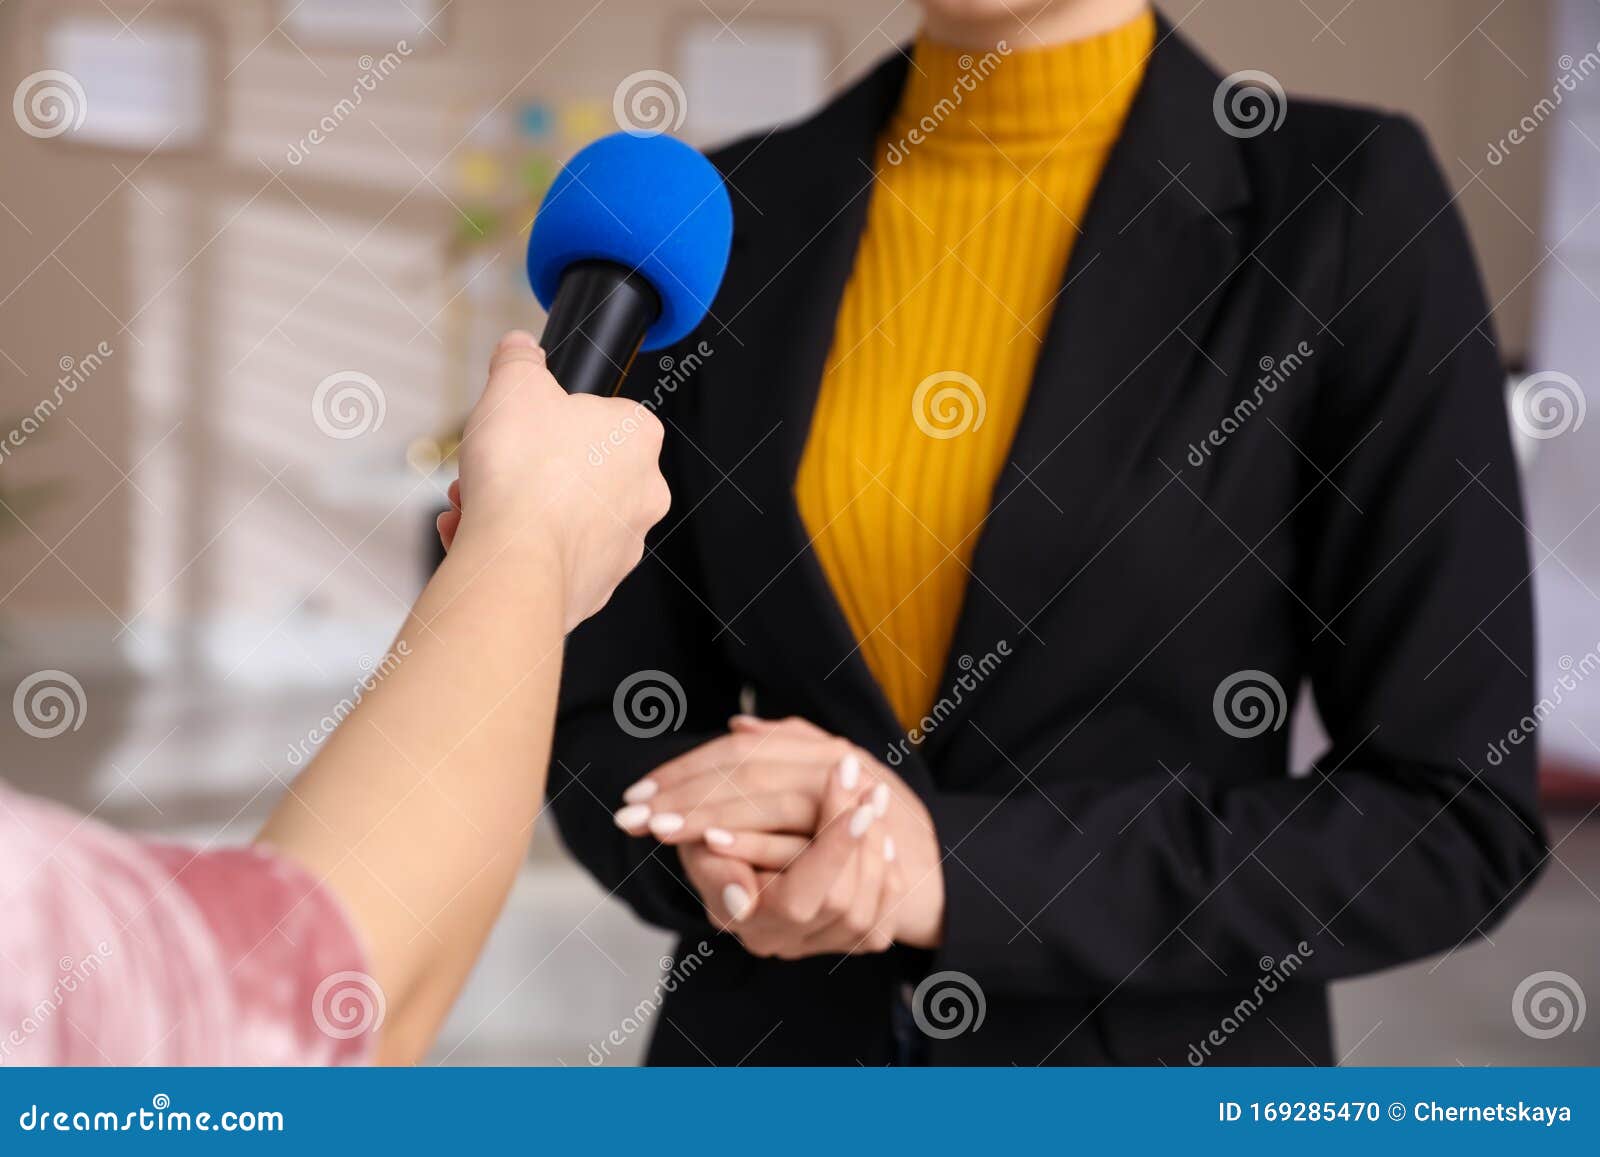 professional journalist interviewing young woman in room